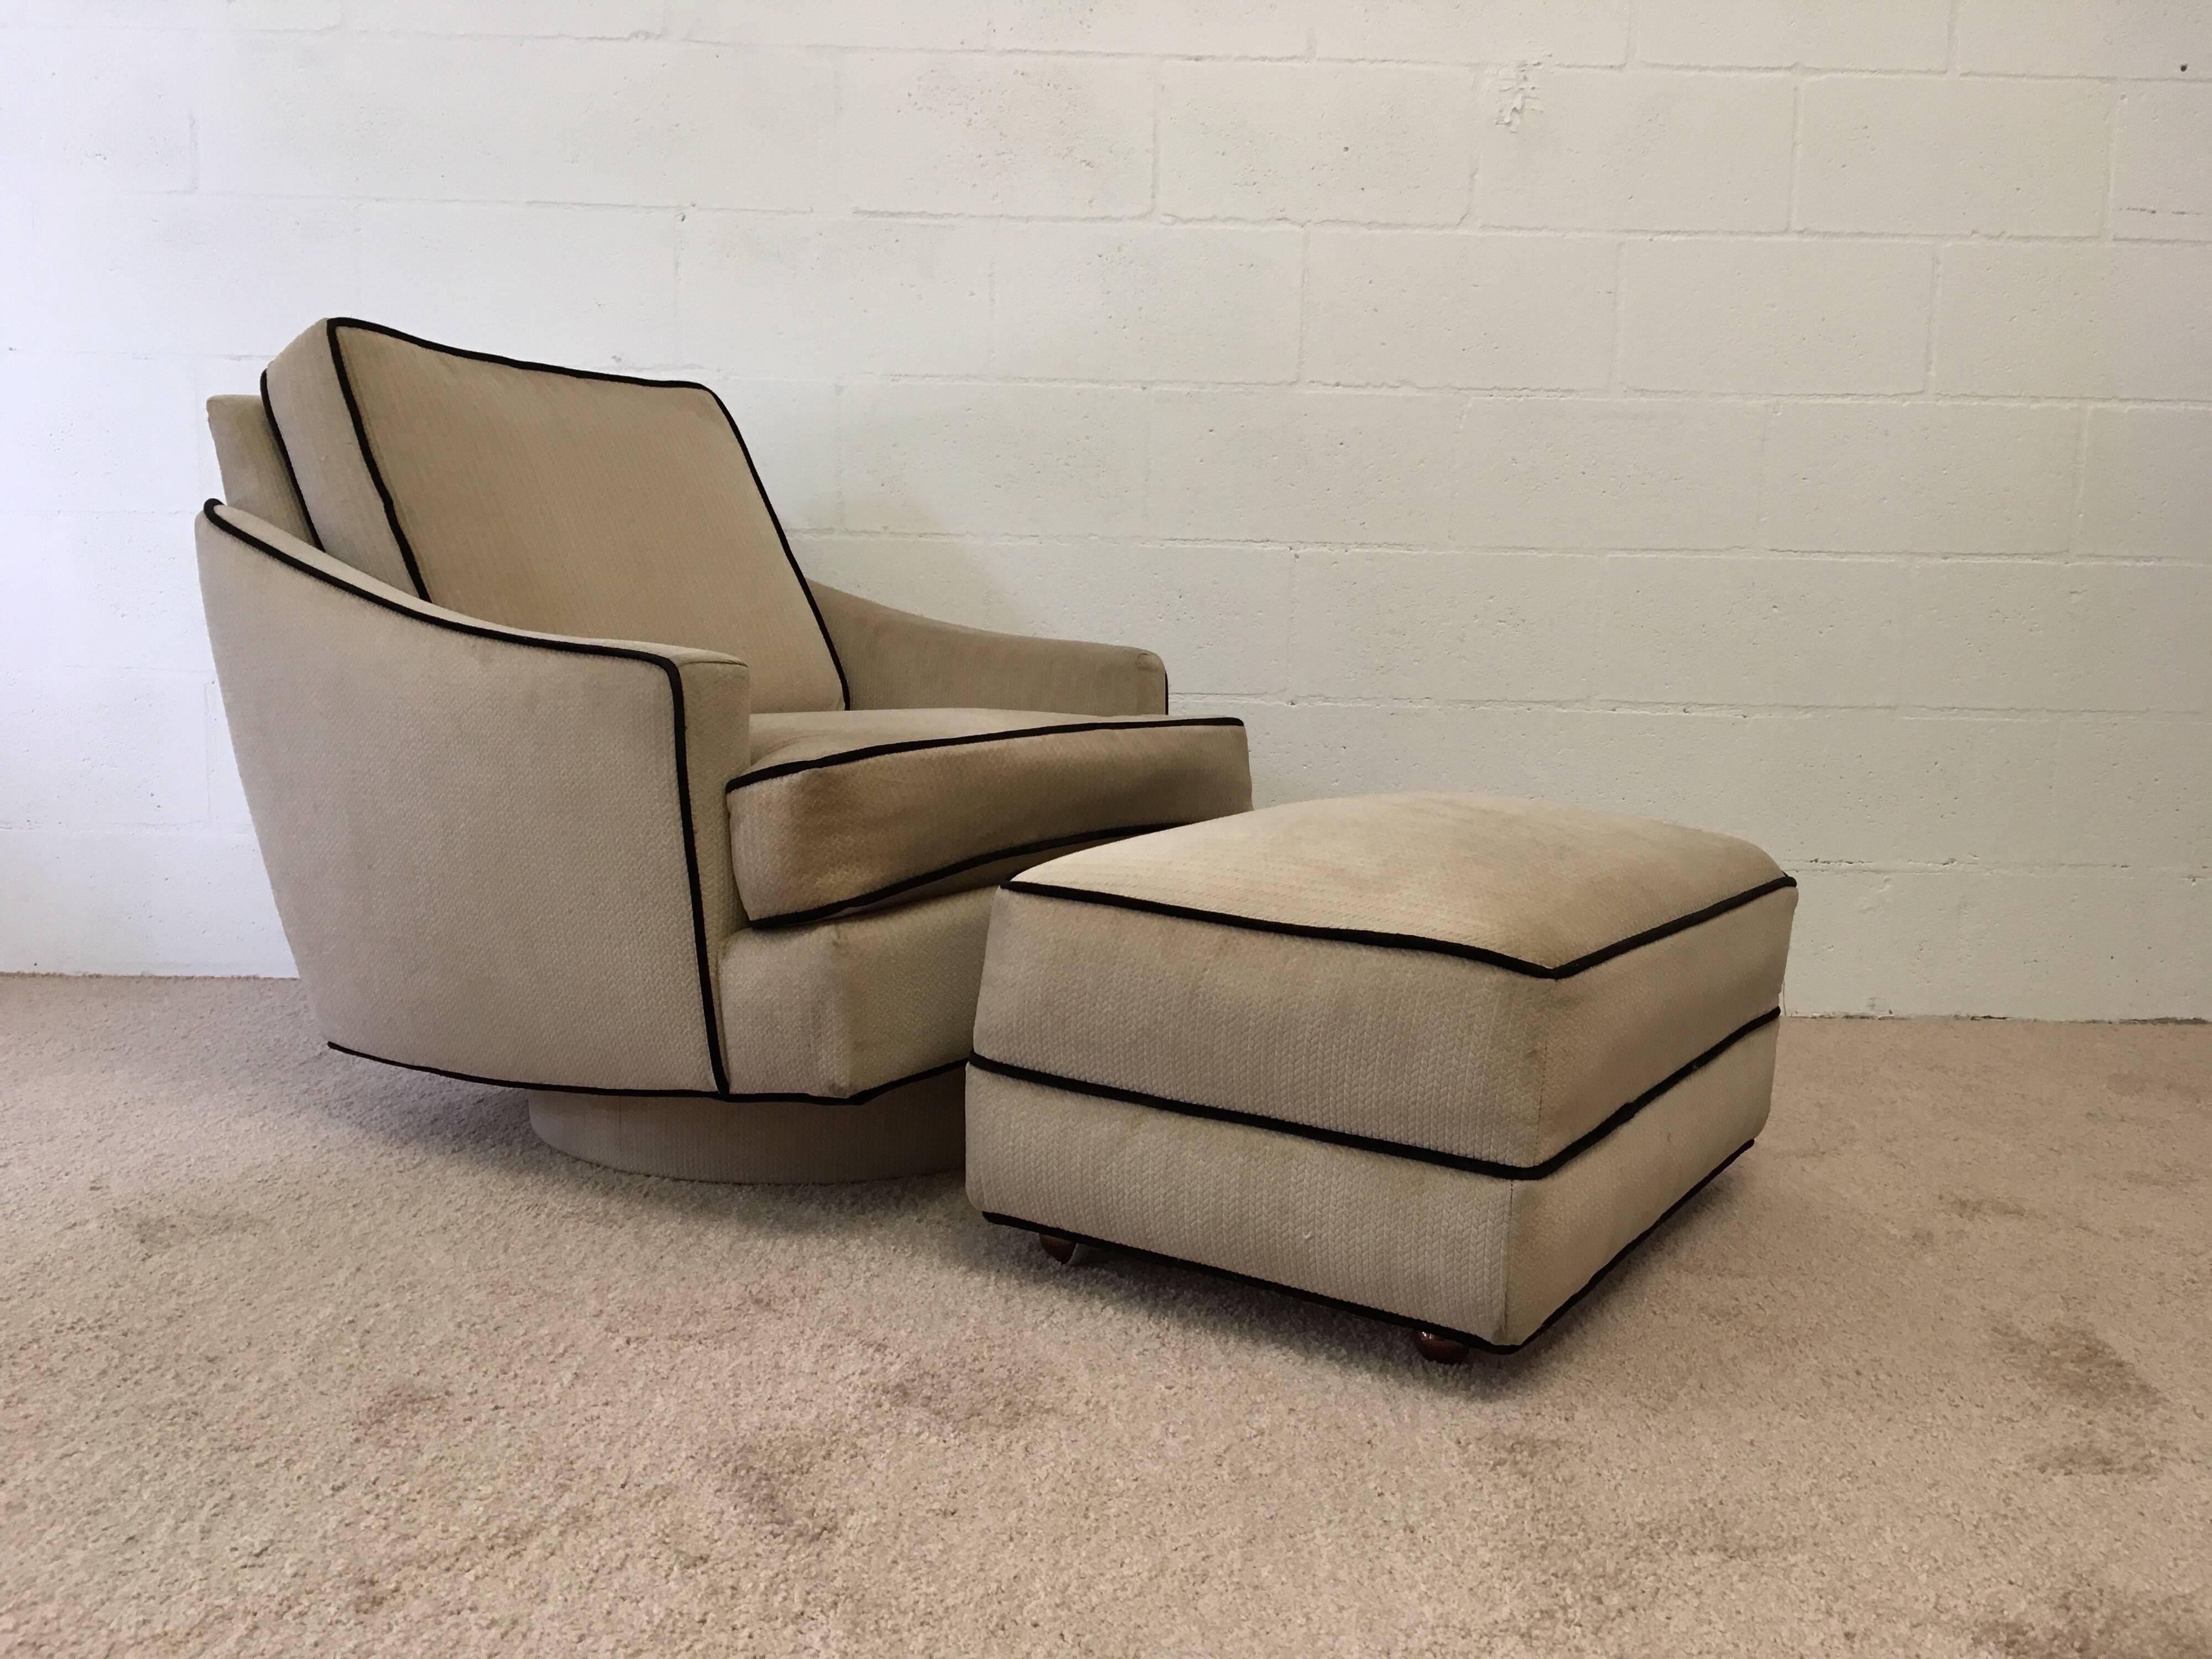 Fabric Milo Baughman Lounge Chair with Ottoman For Sale